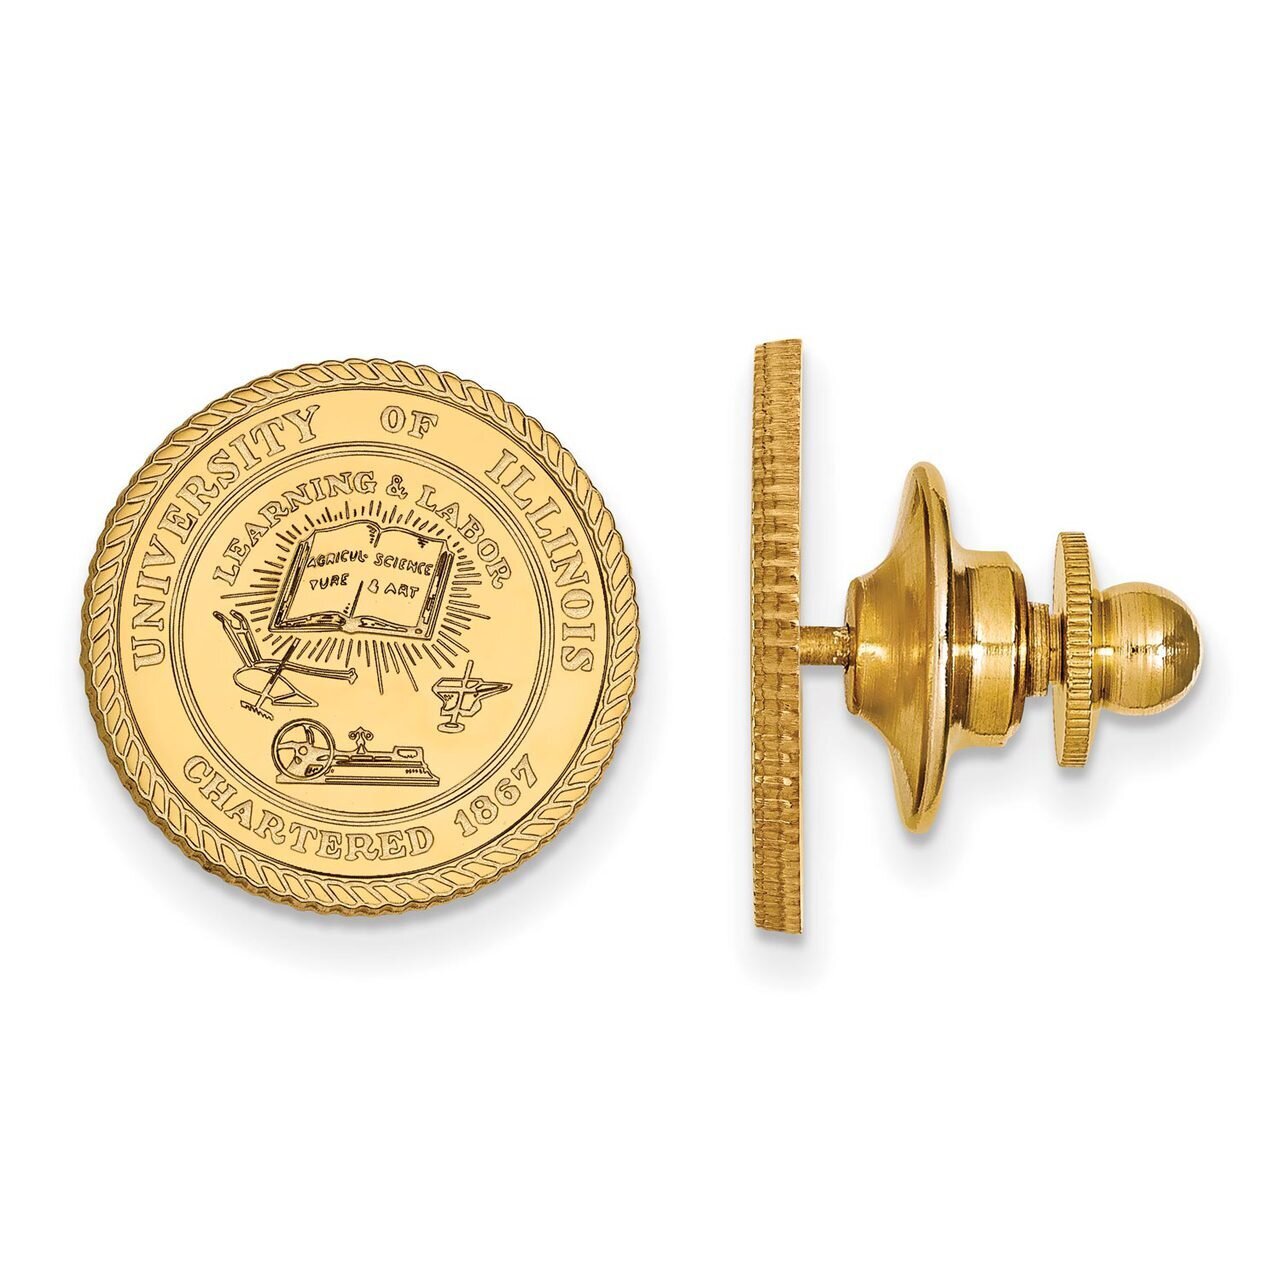 University of Illinois Crest Lapel Pin Gold-plated Silver GP066UIL